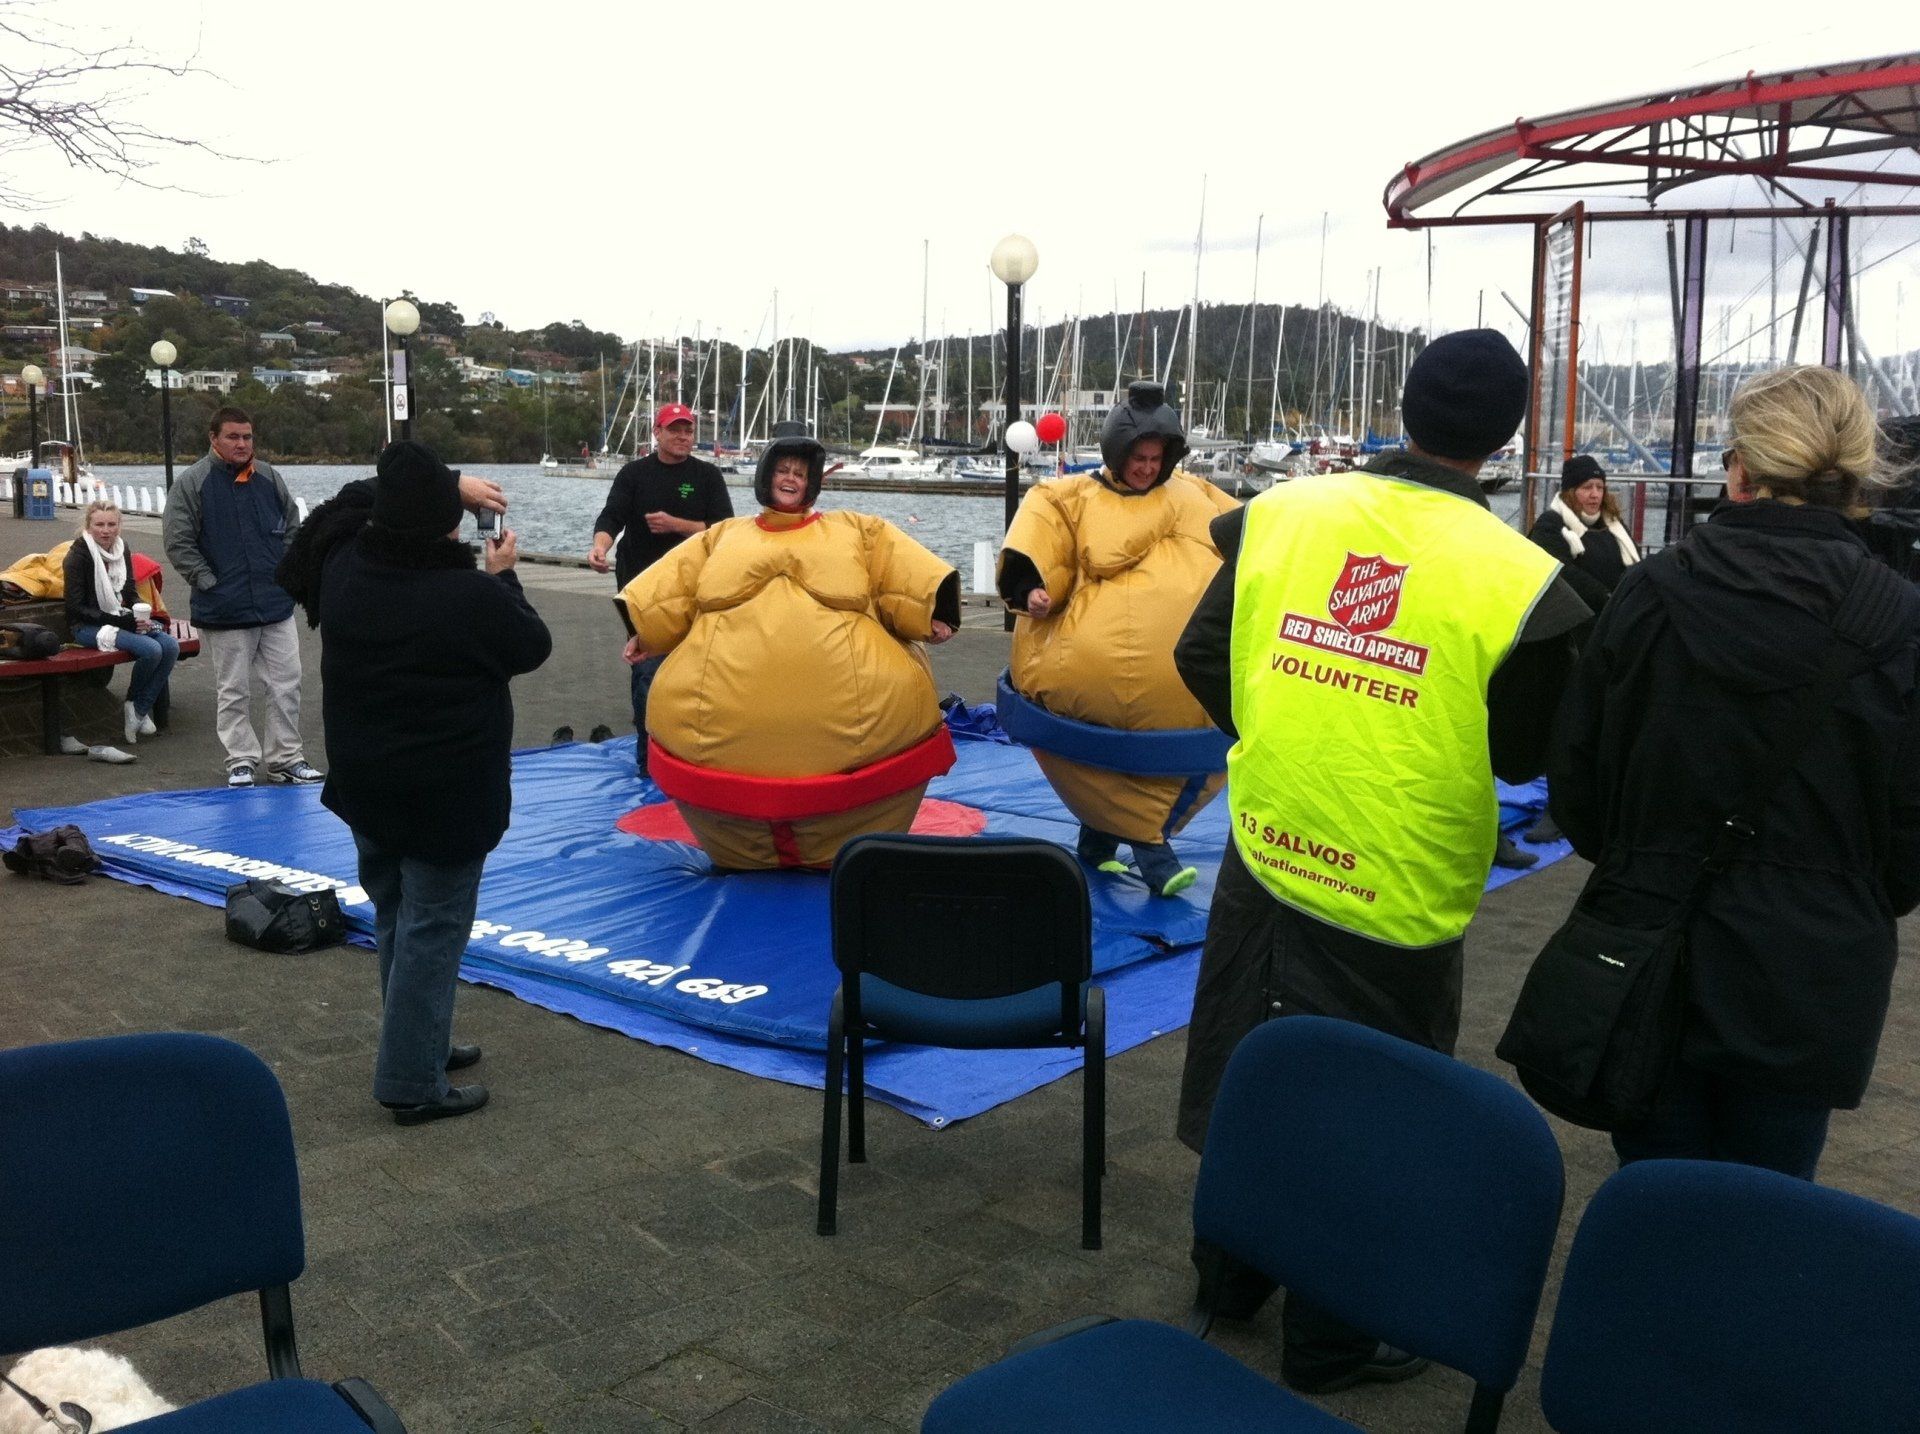 sumo suits hobart, sumo suits for hire hobart, sumo suits for rent hobart, sumo wrestling suits hobart, traditional Japanese wrestler, inflatable suits, children’s party hobart, kids parties hobart, children entertainment hobart, adult’s party hobart, adult games hobart, adult entertainment hobart, party equipment hobart, party equipment for hire hobart, party equipment for rent hobart, party equipment hire hobart, party supplies hobart tasmania, party supplies for hire hobart, party supplies for rent hobart, sport games hobart, interactive sport games hobart, interactive sport games for hire hobart, interactive sport games for rent hobart, amusement equipment hobart, amusement equipment for hire hobart, amusement equipment for rent hobart, amusement equipment and hire hobart